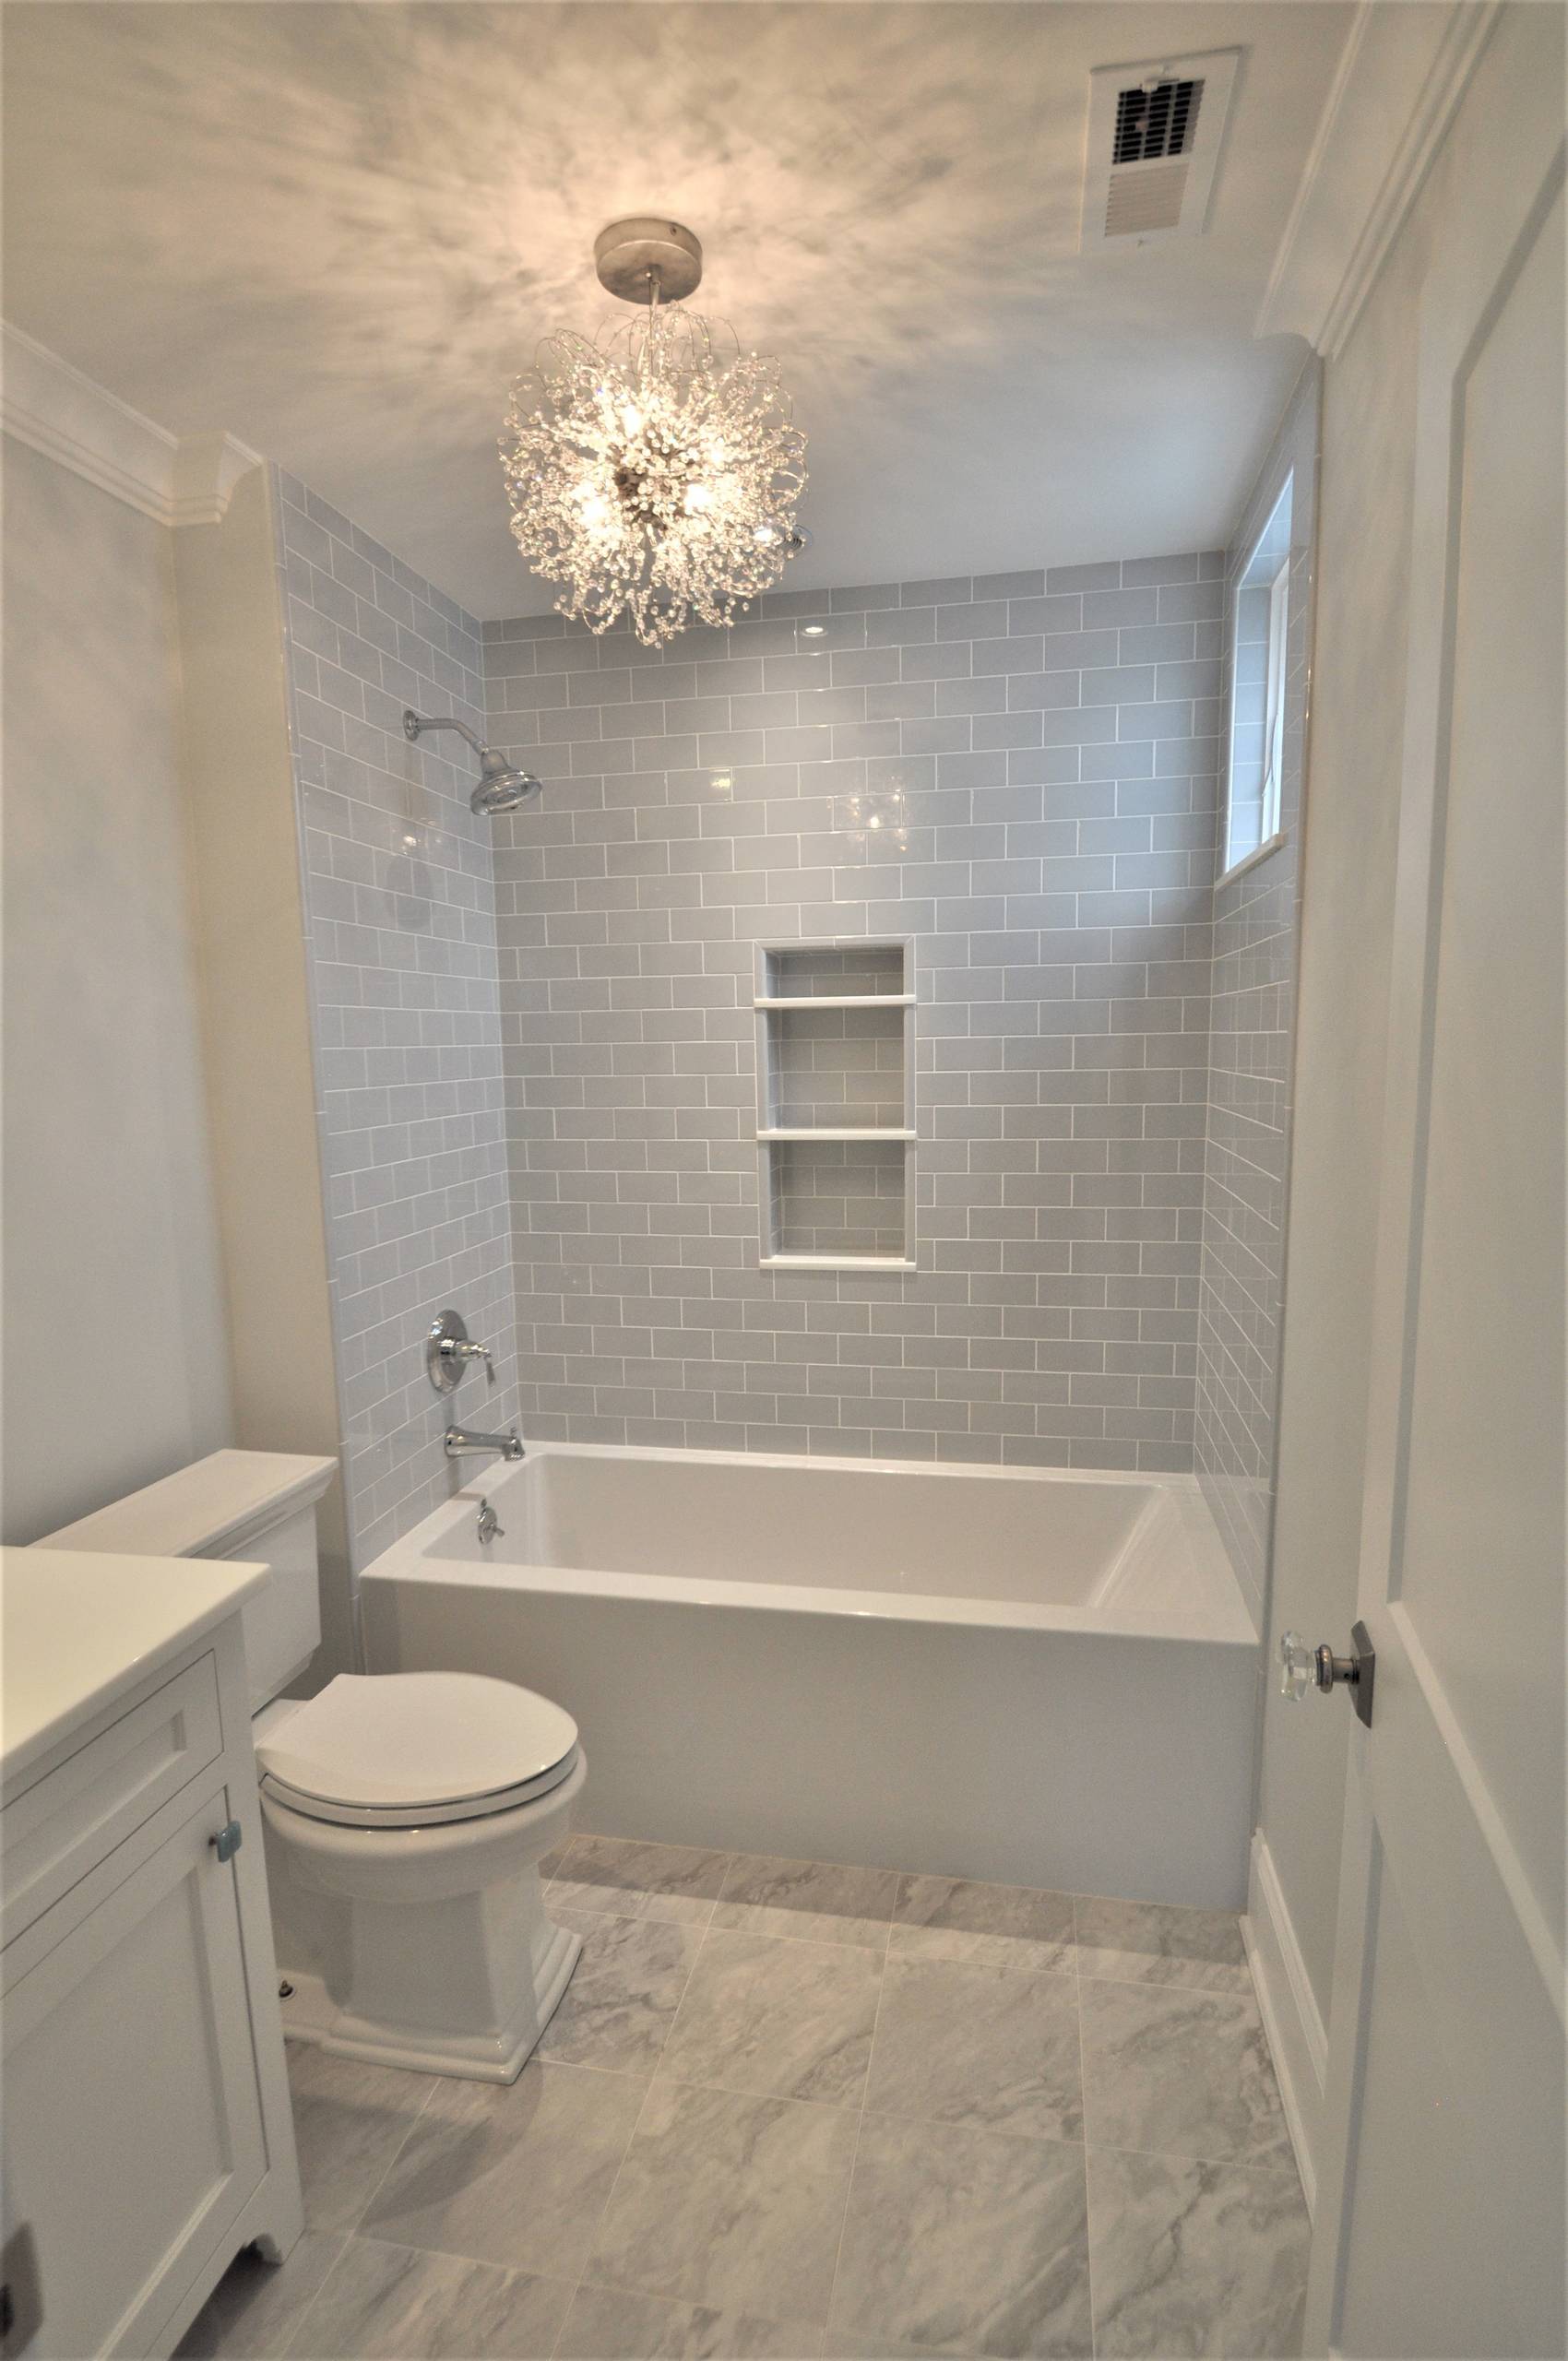 75 Beautiful Small Bathroom Pictures Ideas October 2020 Houzz,Simple Living Room Home Window Design